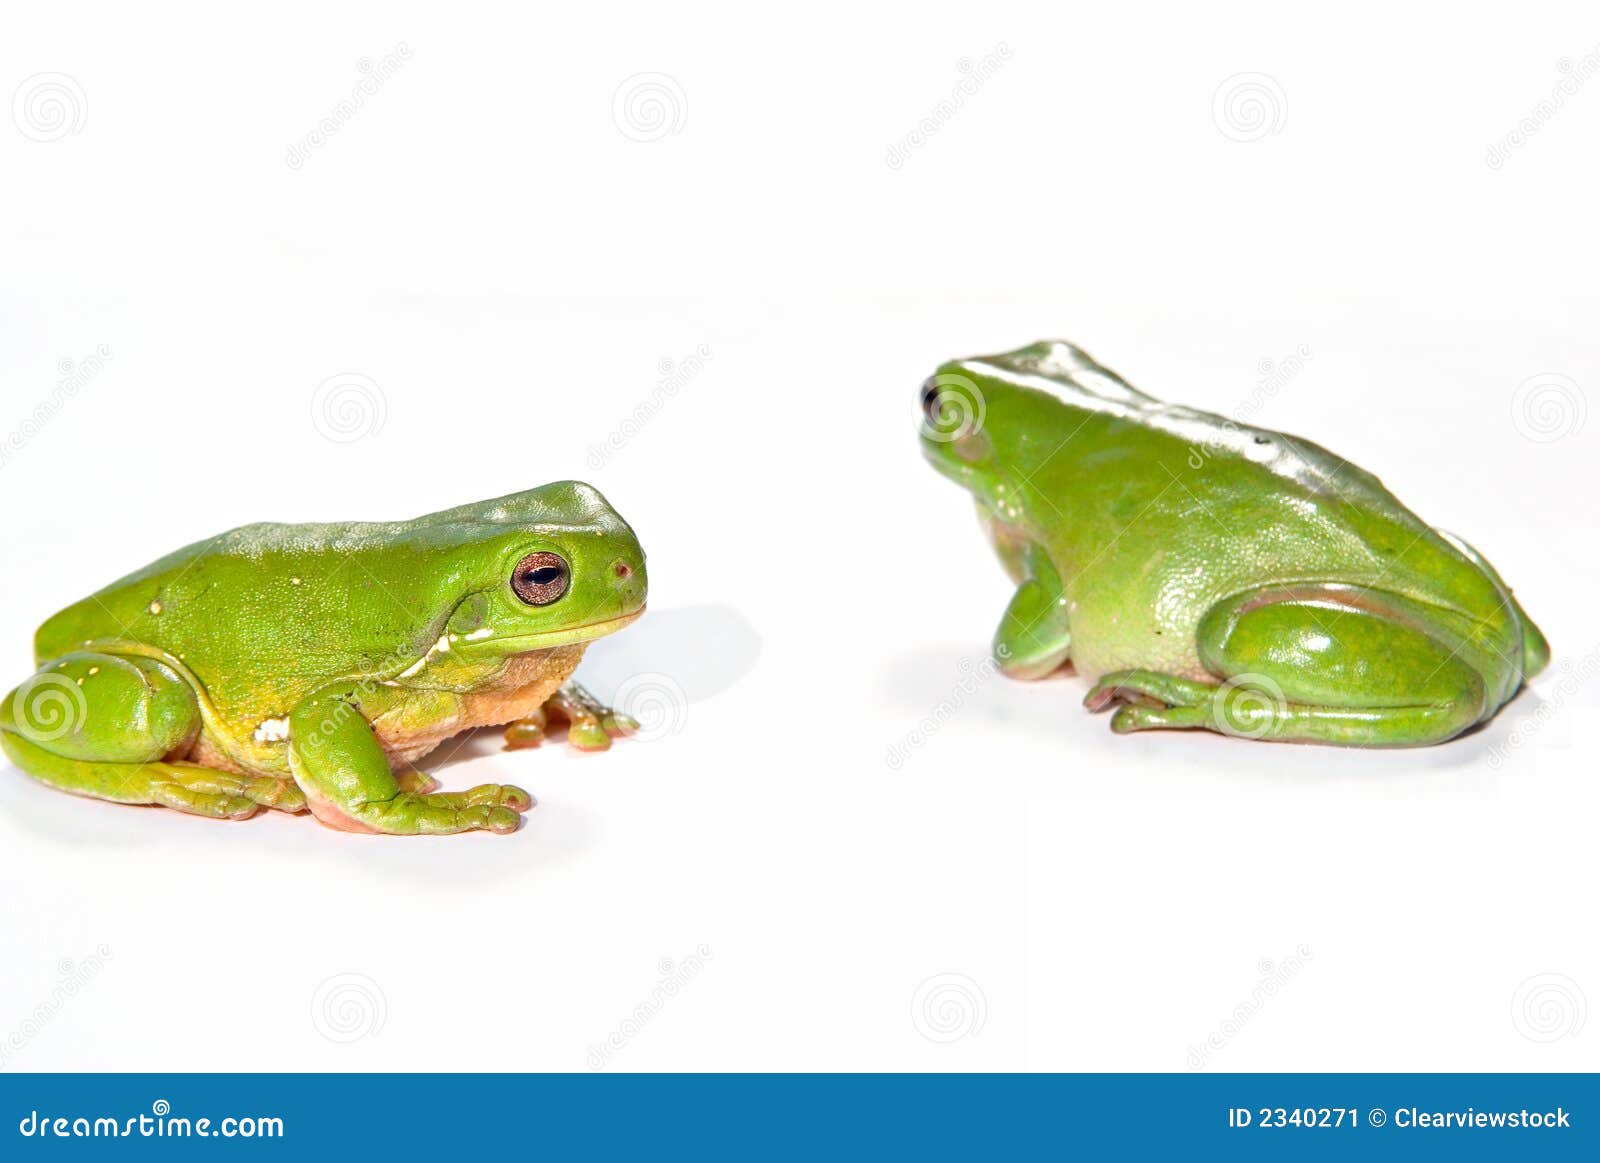 two green tree frogs